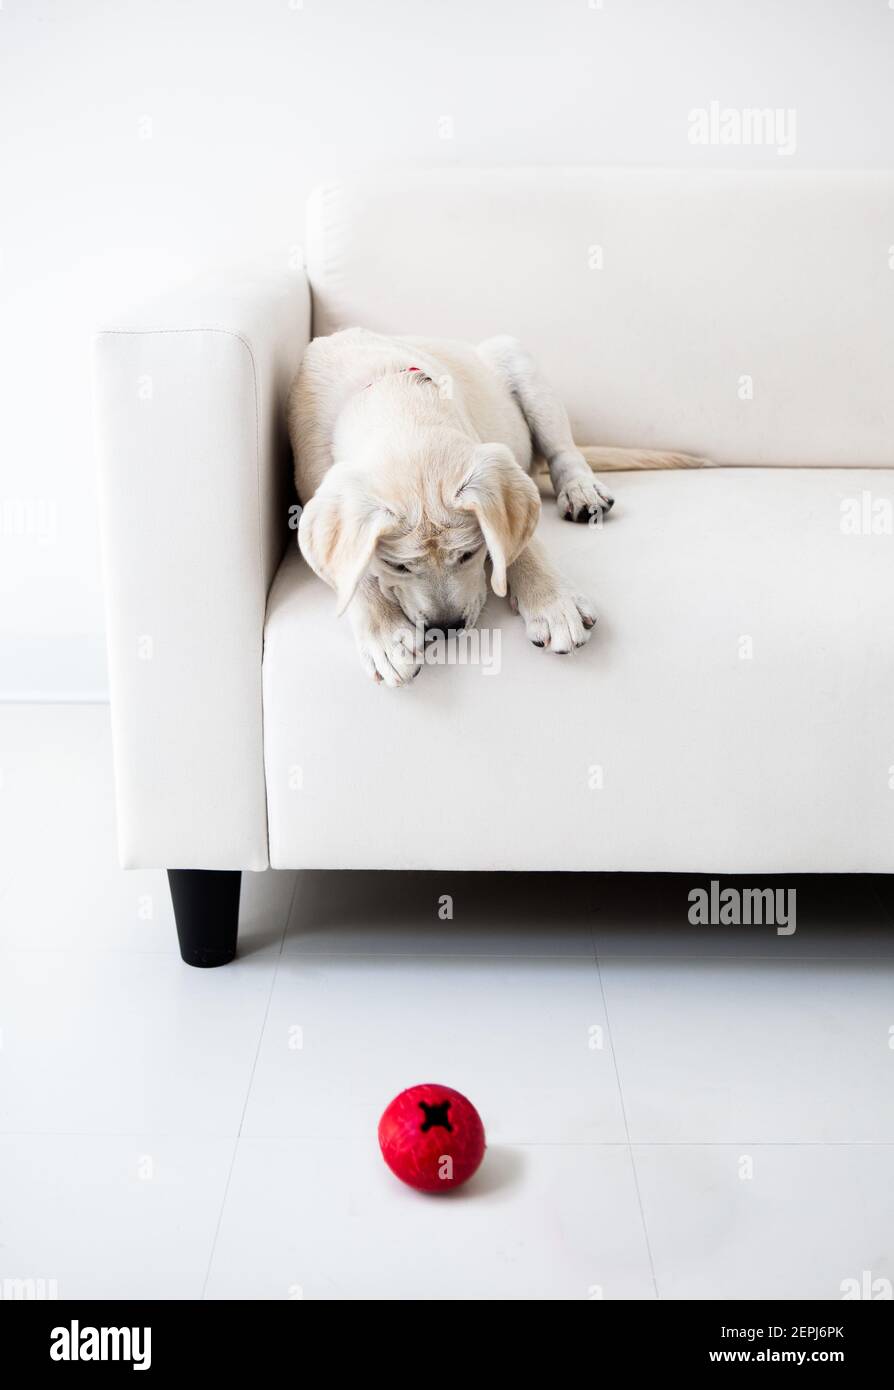 A yellow lab puppy on a couch, looking at a ball on the floor. Stock Photo